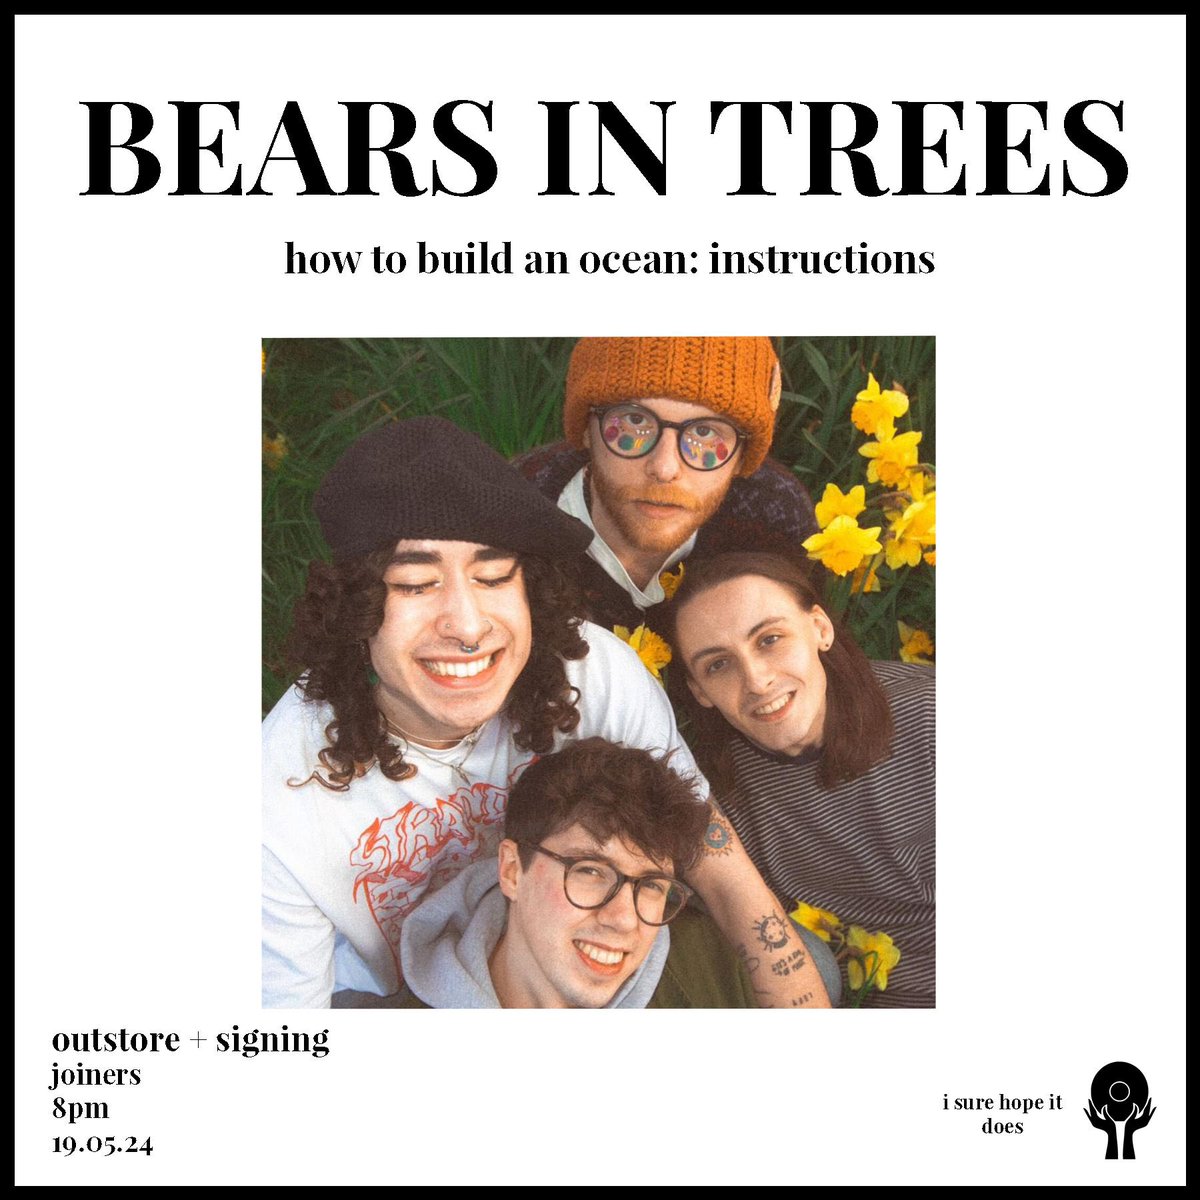 BEARS IN TREES // HOW TO BUILD AN OCEAN : INSTRUCTIONS Live Out-store & Signing 19.5.24 8pm Venue Joiners Ticket bundles available now on our web store Vinilo.co.uk